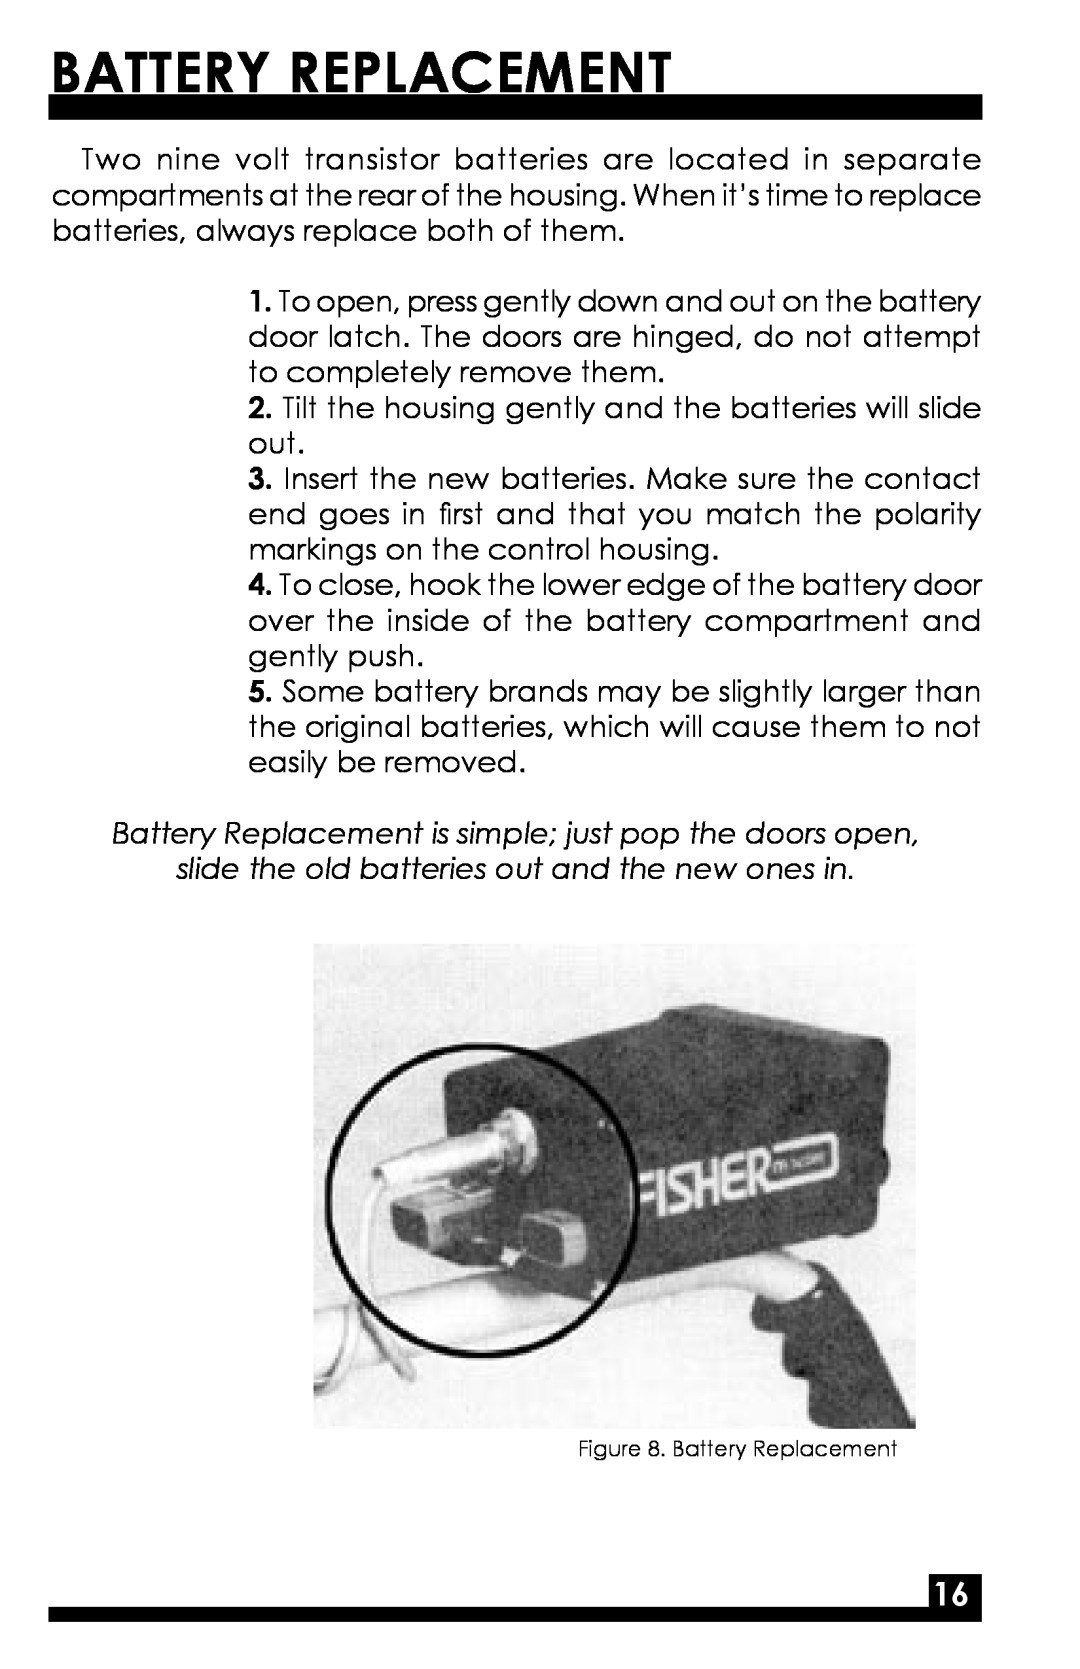 Fisher 1225-X manual Battery Replacement, slide the old batteries out and the new ones in 